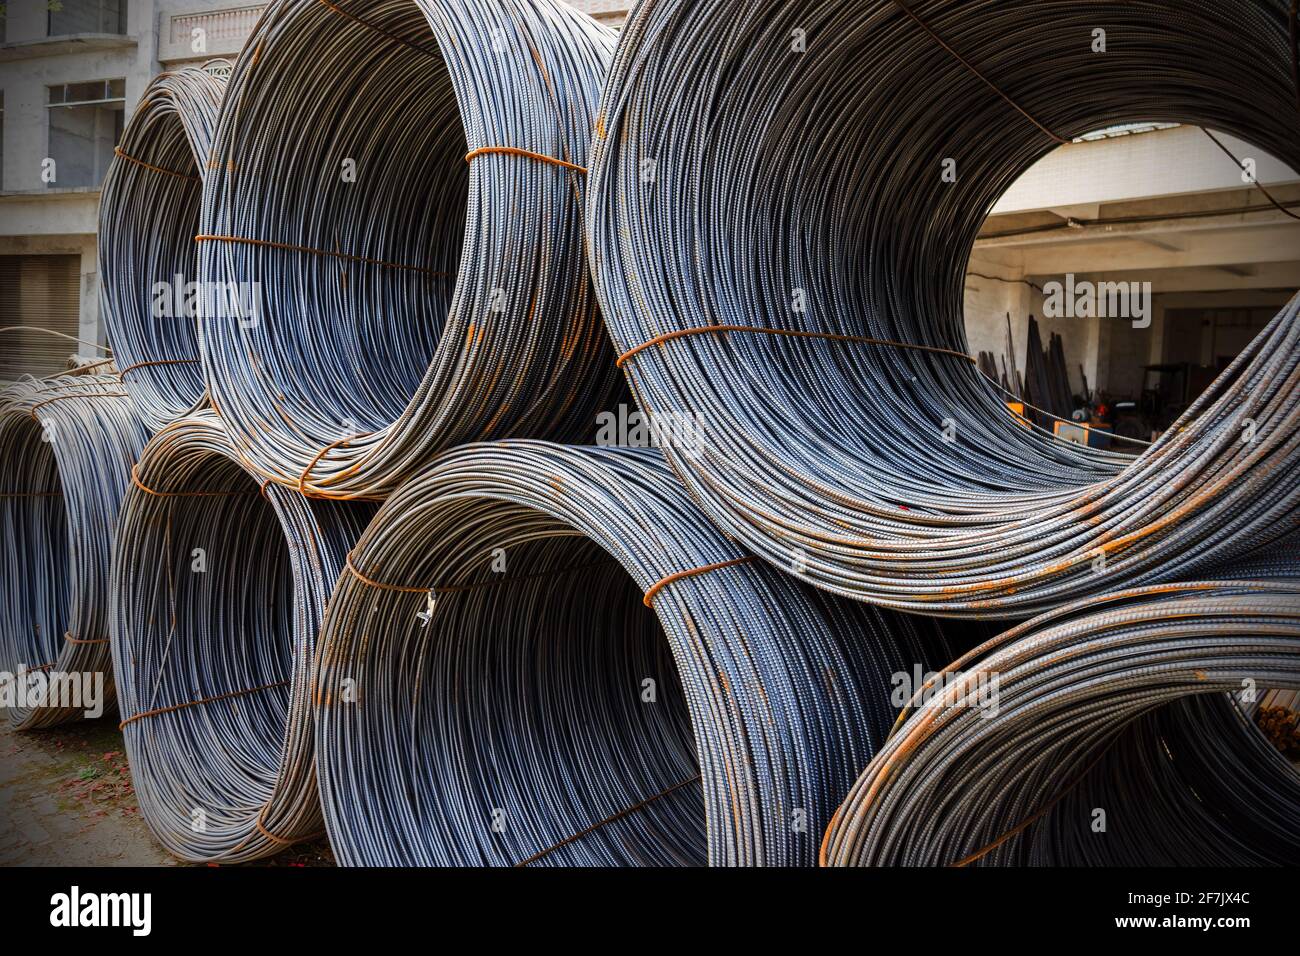 steel rebar for reinforcement concrete at construction site with house under construction background Stock Photo